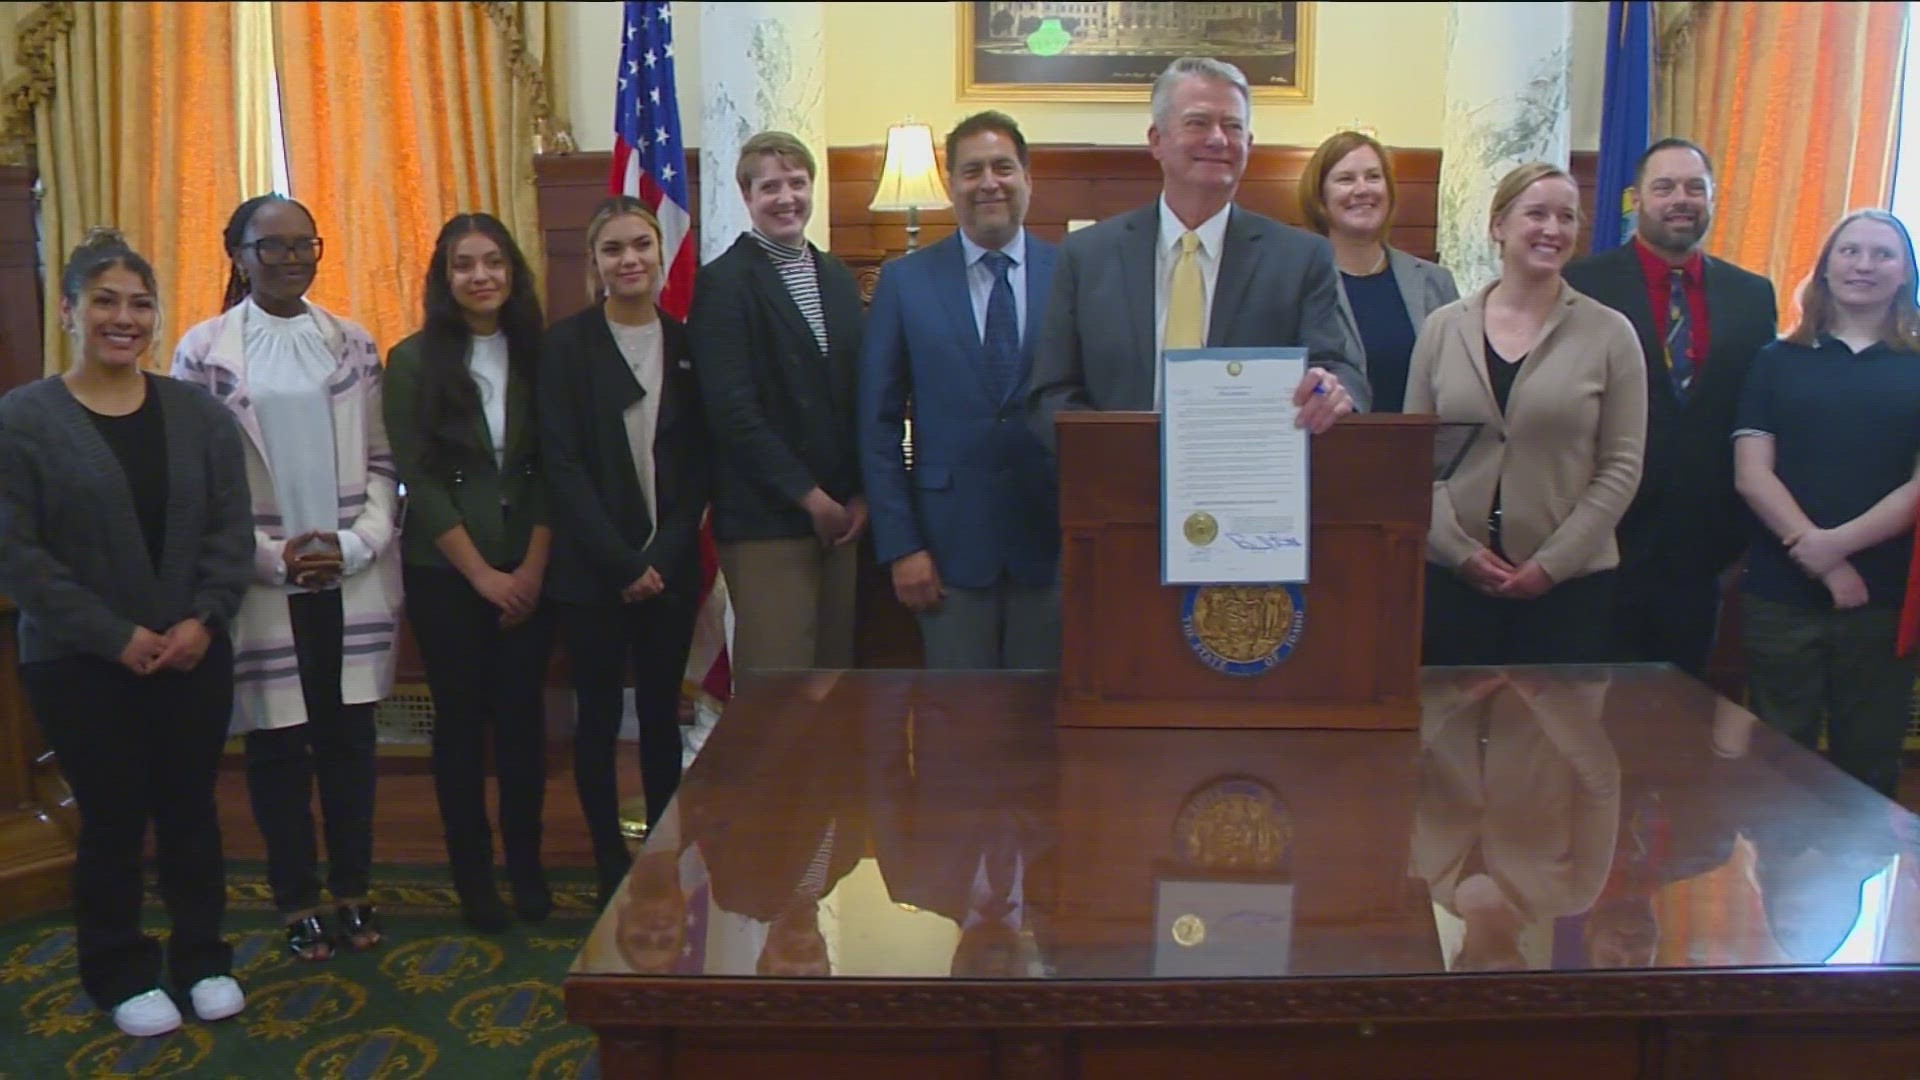 The proclamation designates Nov. 8 as First Generation to College Day in Idaho.